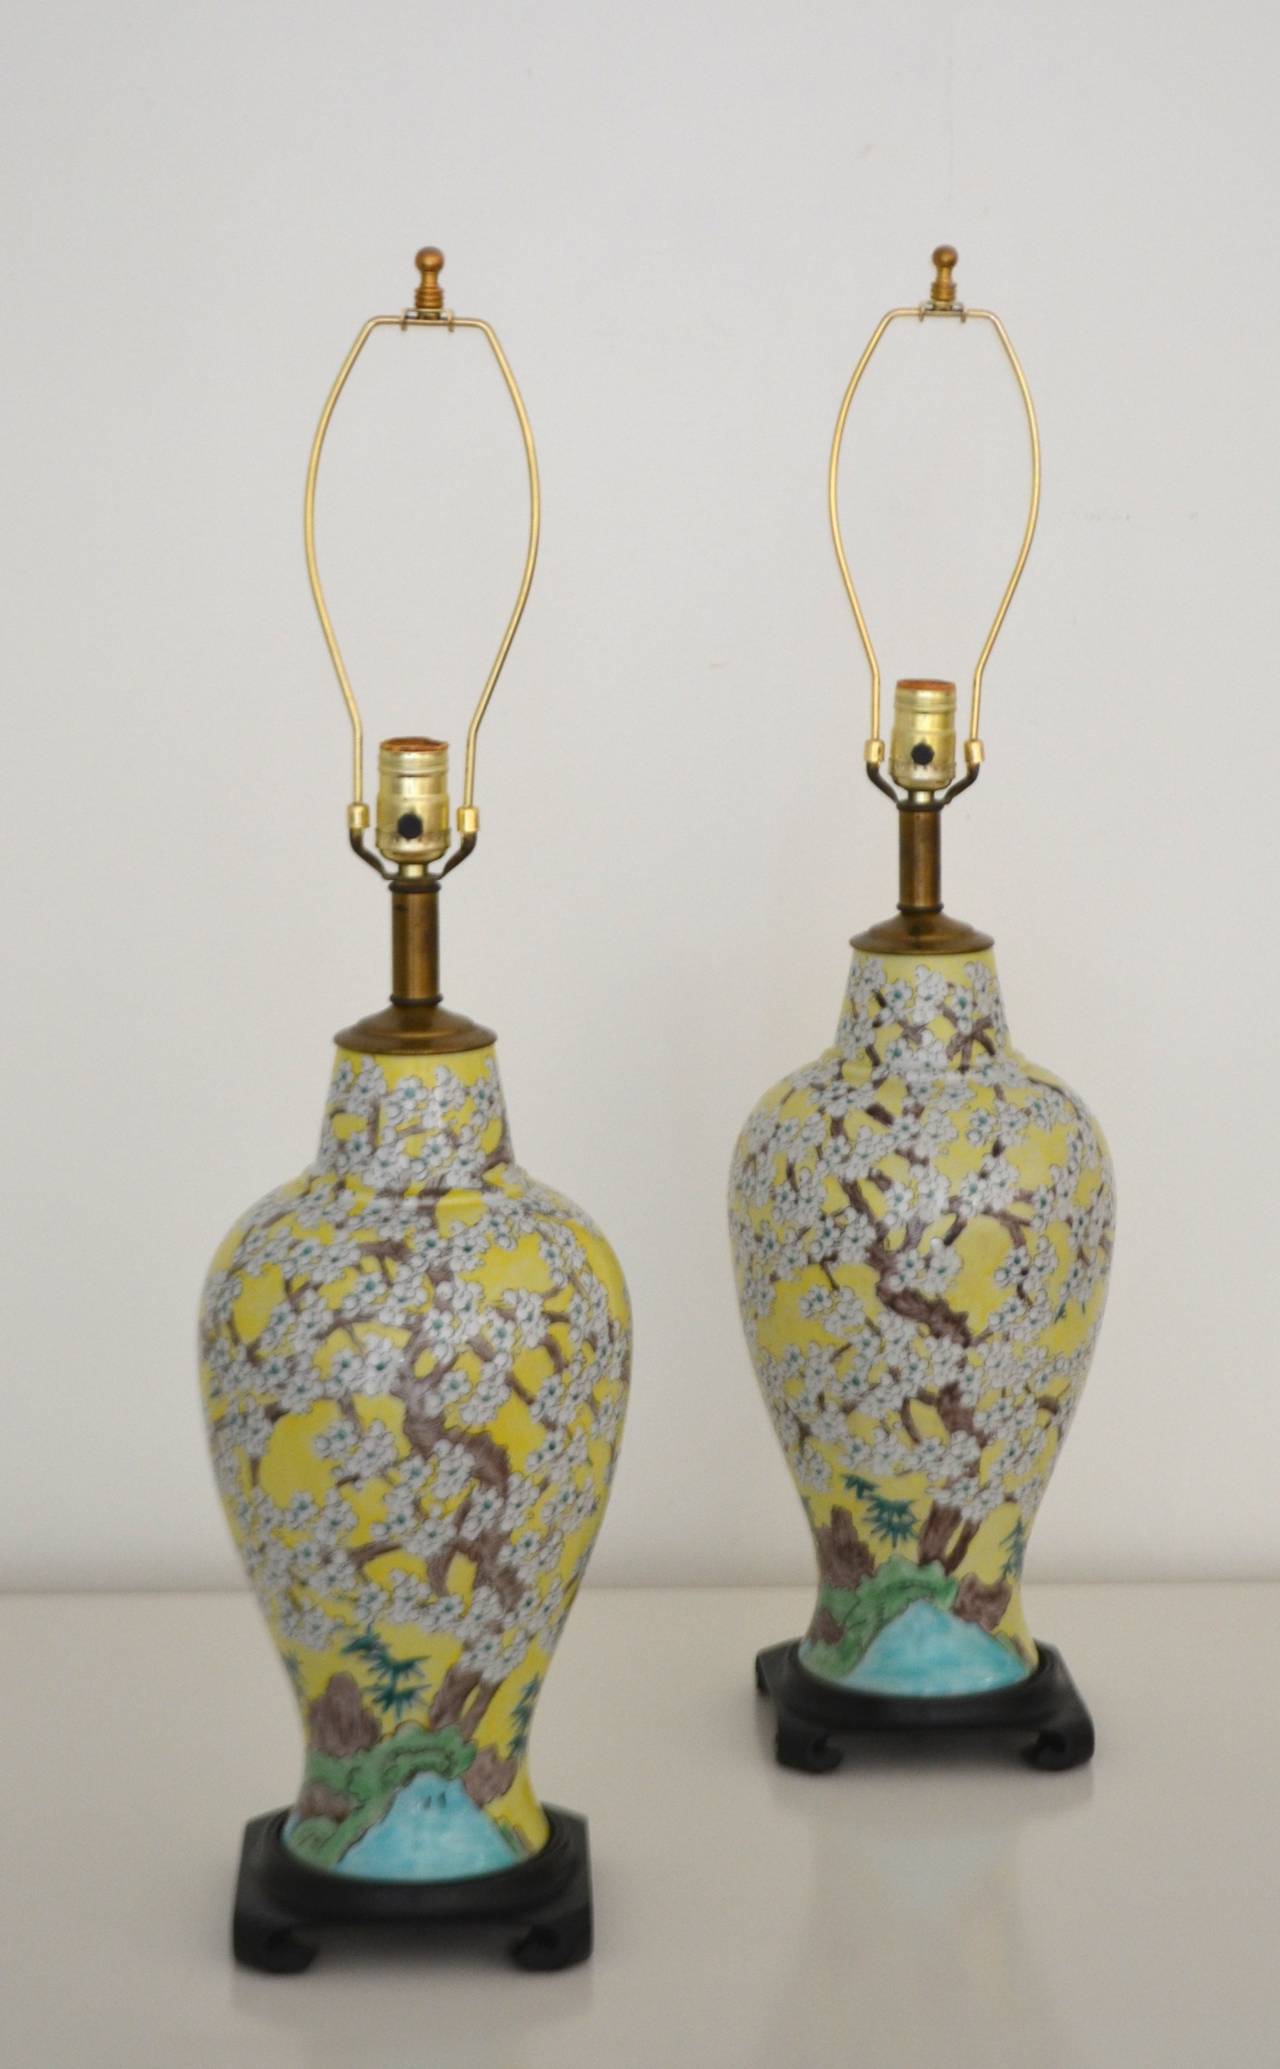 Pair of Asian Inspired Polychrome Porcelain Table Lamps (Hollywood Regency) im Angebot